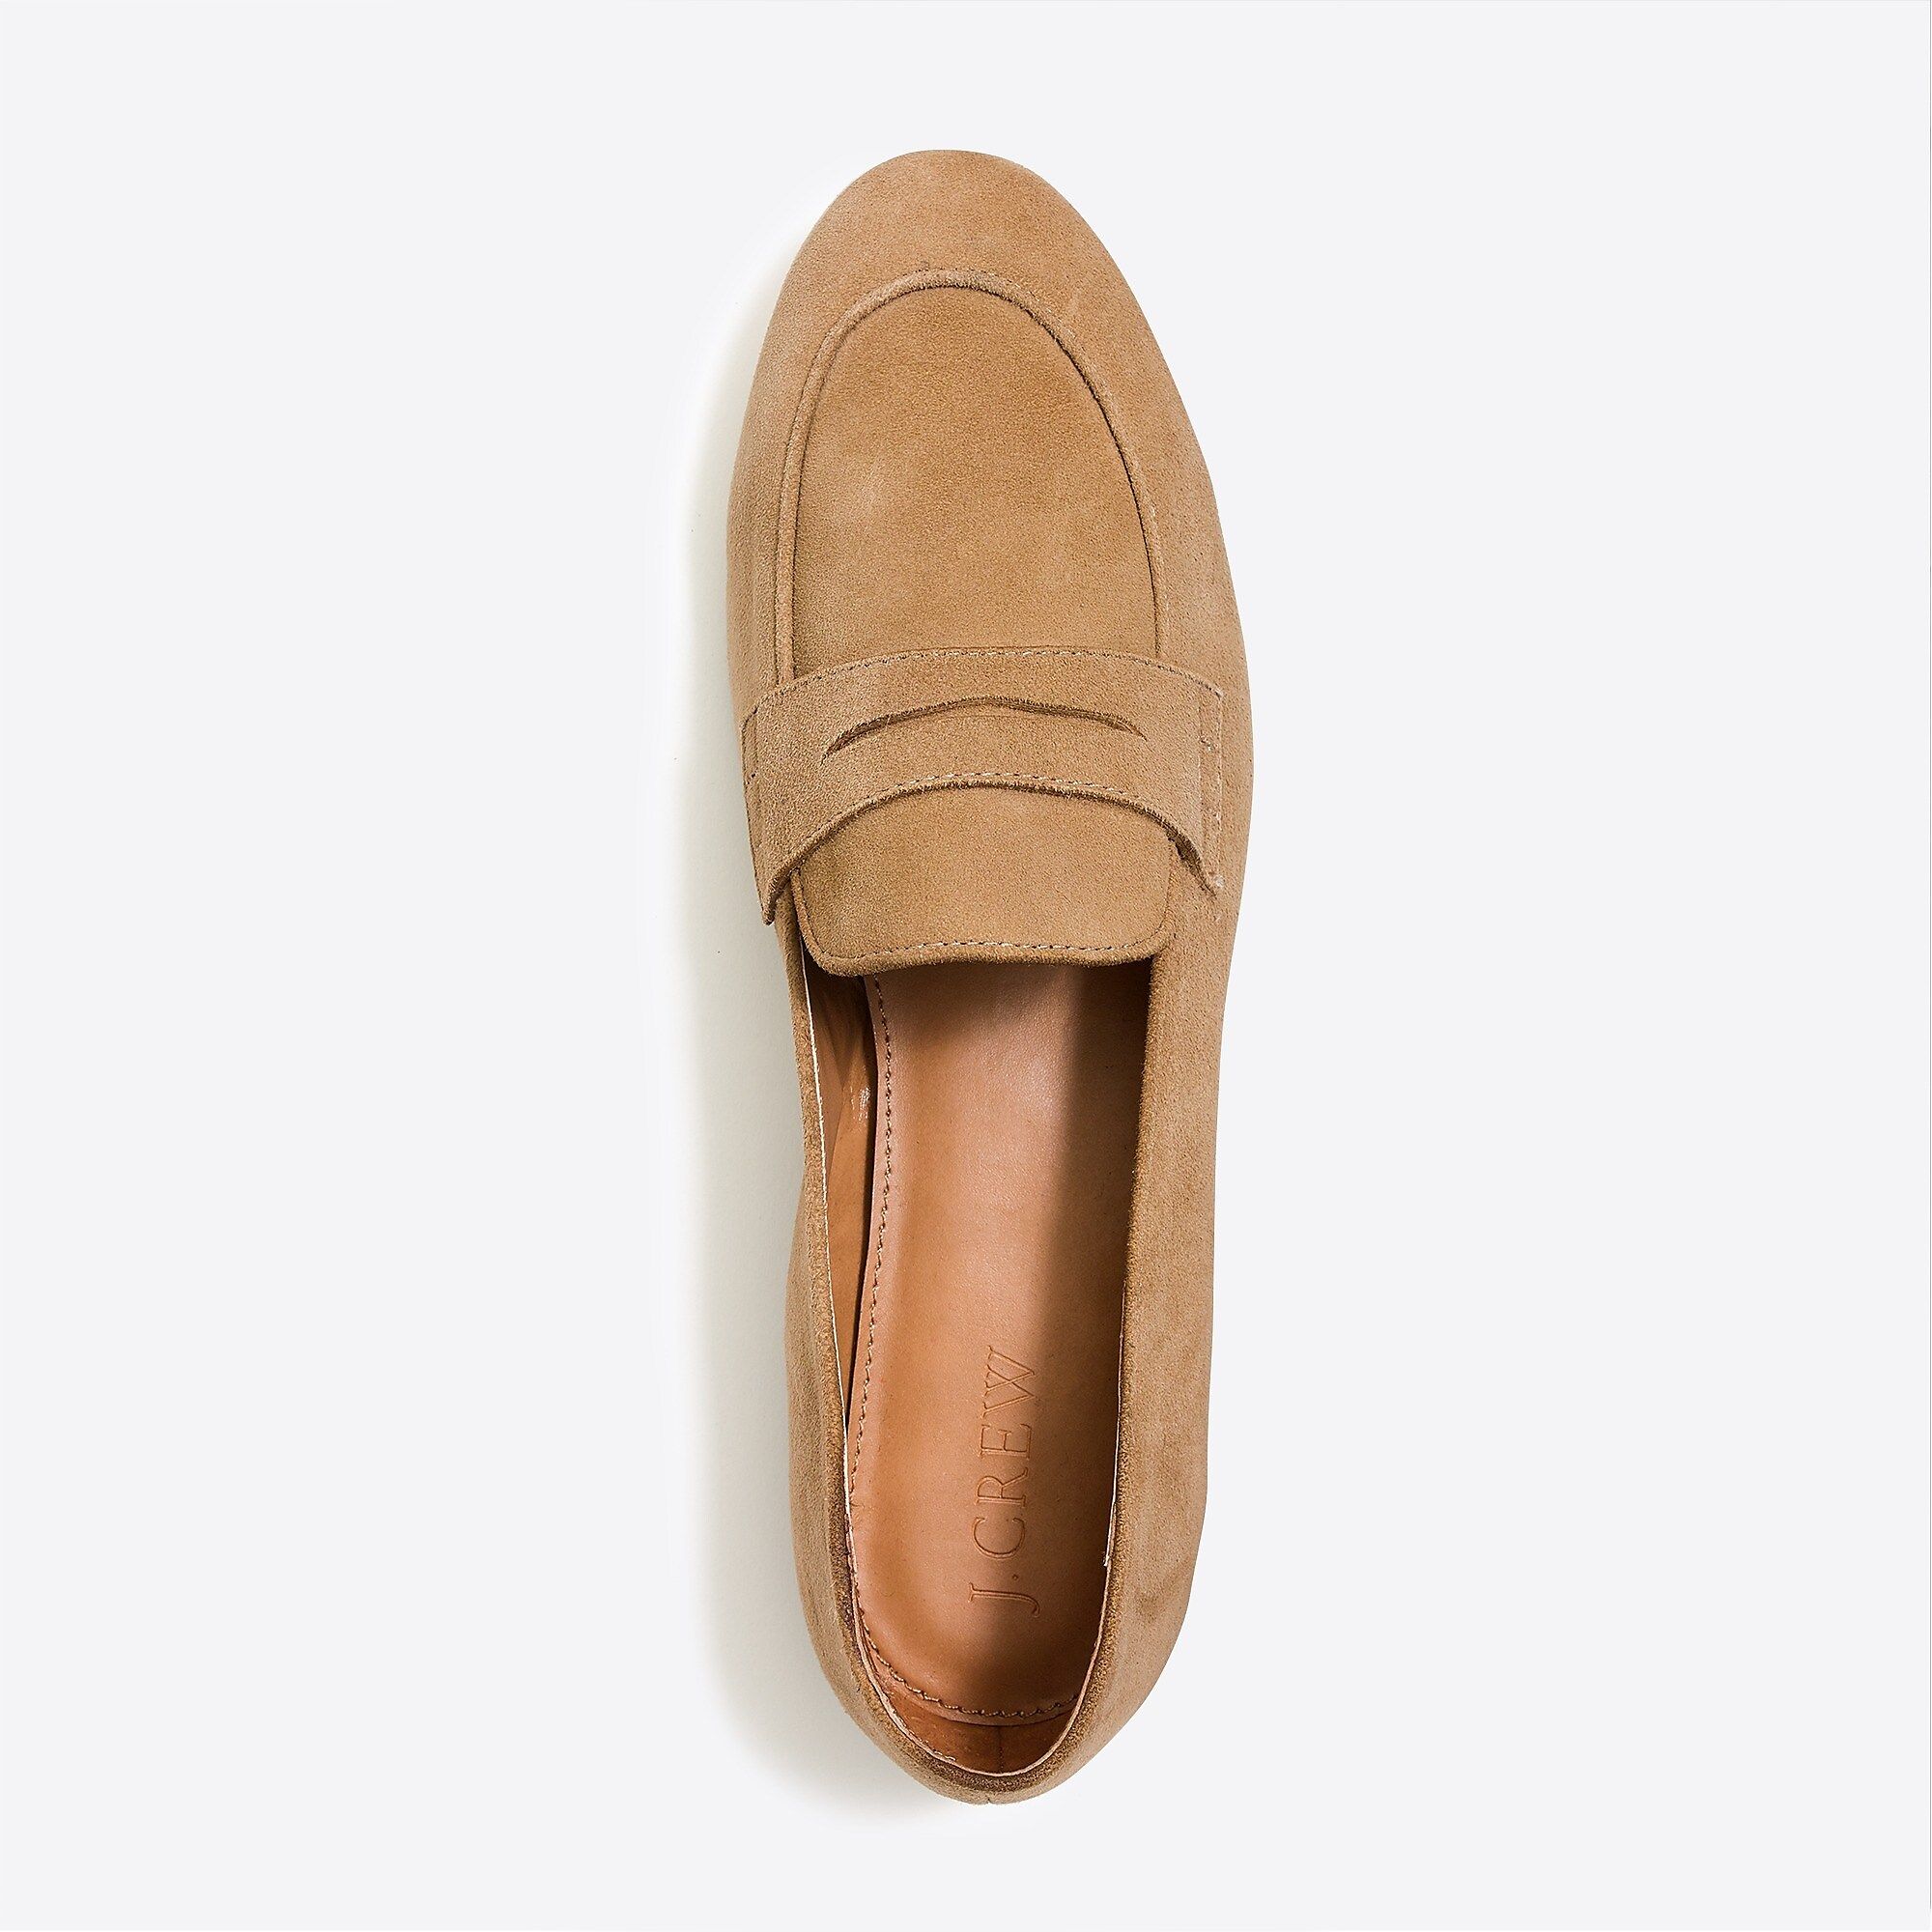 Suede penny loafers | J.Crew Factory